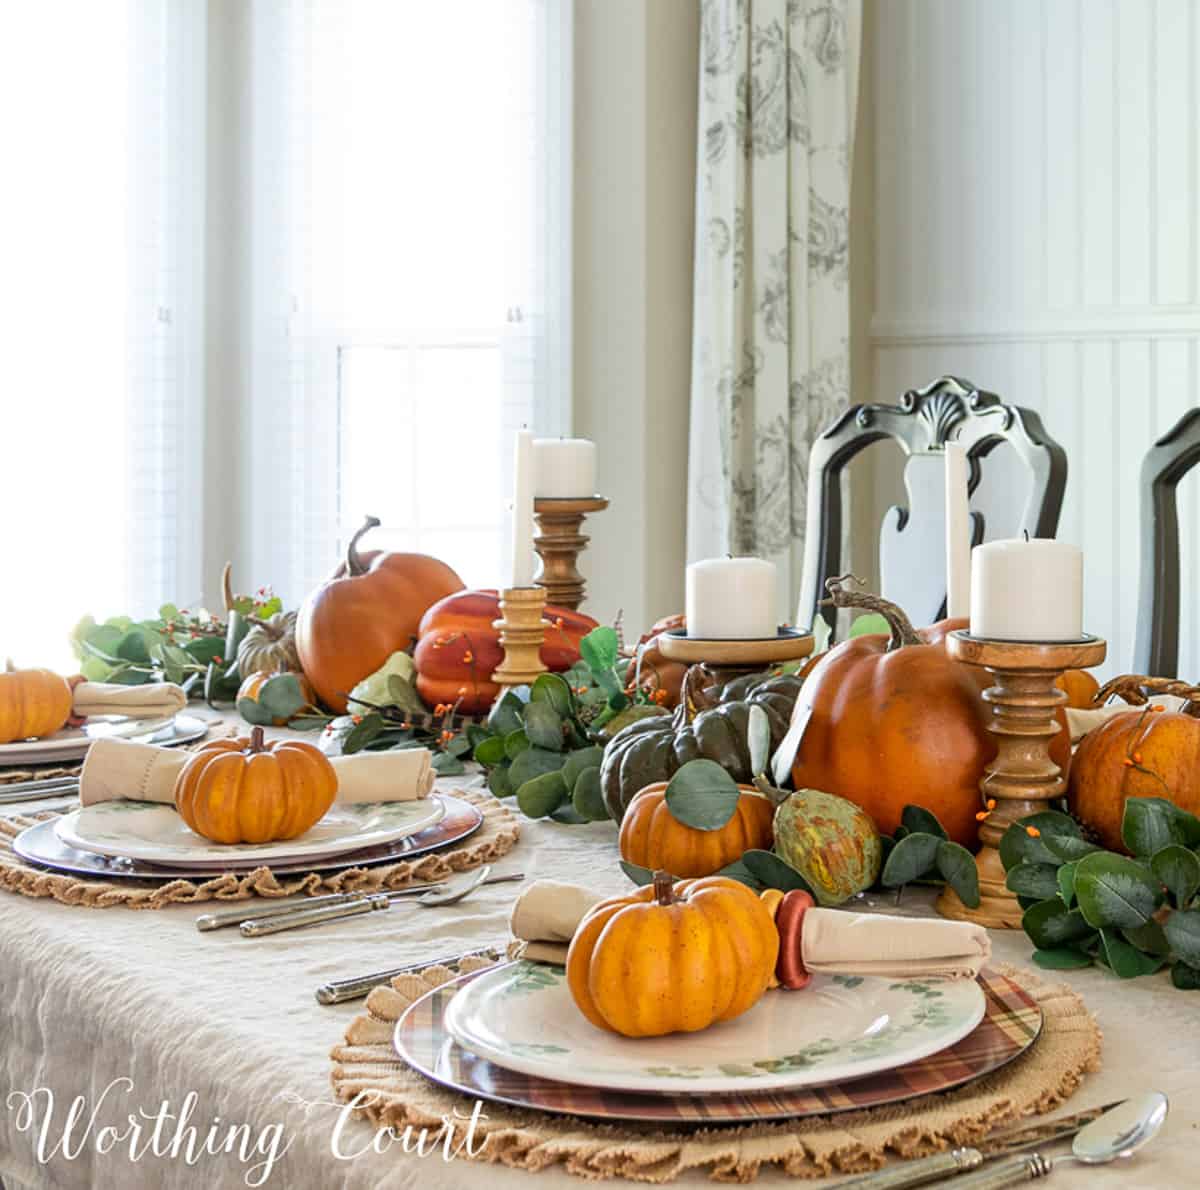 dining table set for Thanksgiving with pumpkins and eucalyptus